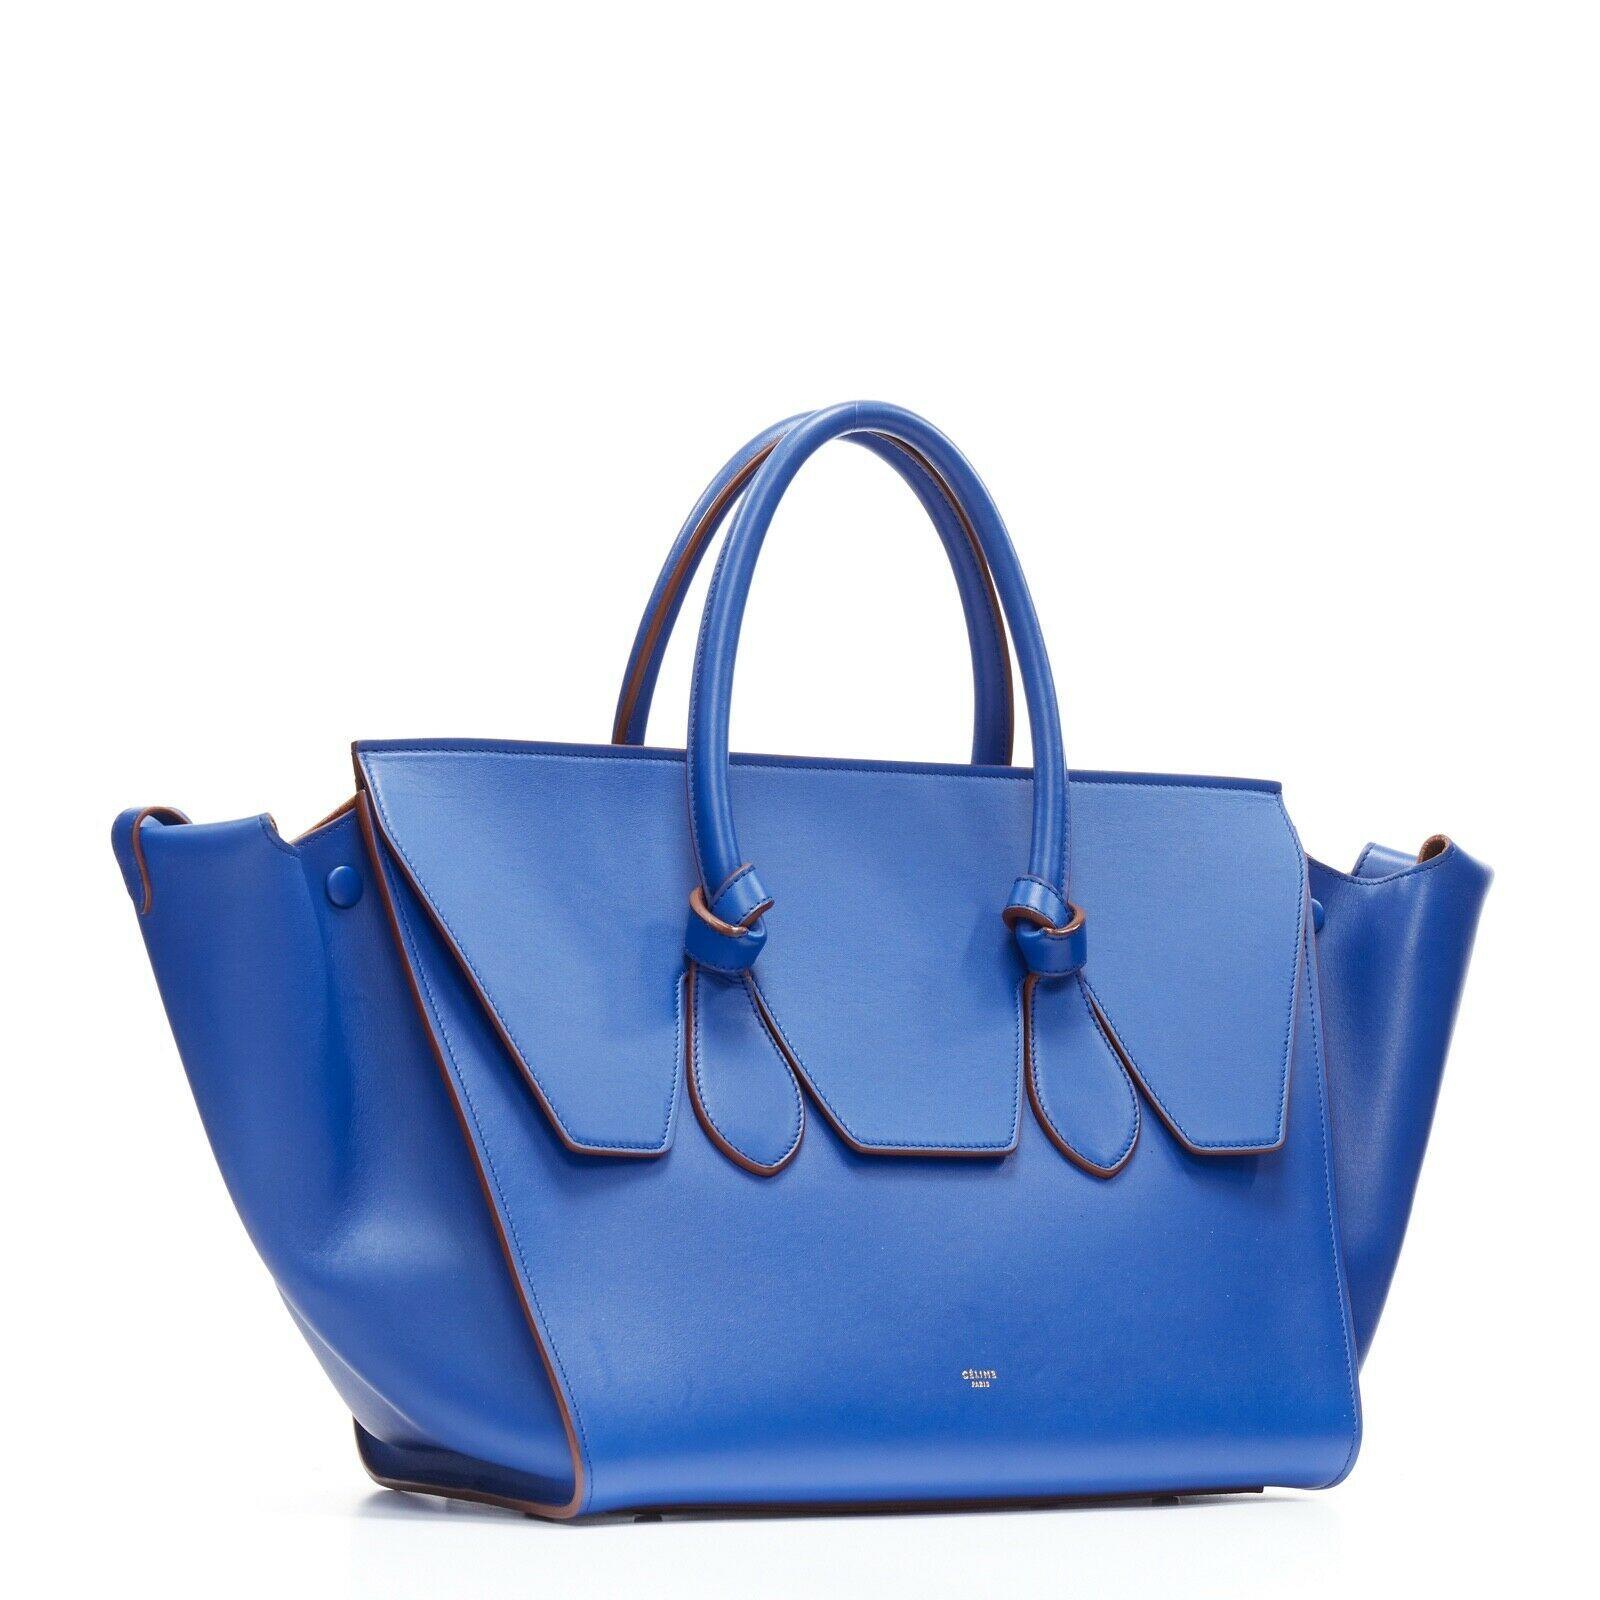 new CELINE PHOEBE PHILO Knot cobalt blue calfskin large shopper tote bag full
CELINE BY PHOEBE PHILO
Knot bag . 
Tie knot handle design. 
Flared out sides with snap button closure to secure shape . 
Dangling straps that can be worn with the flared